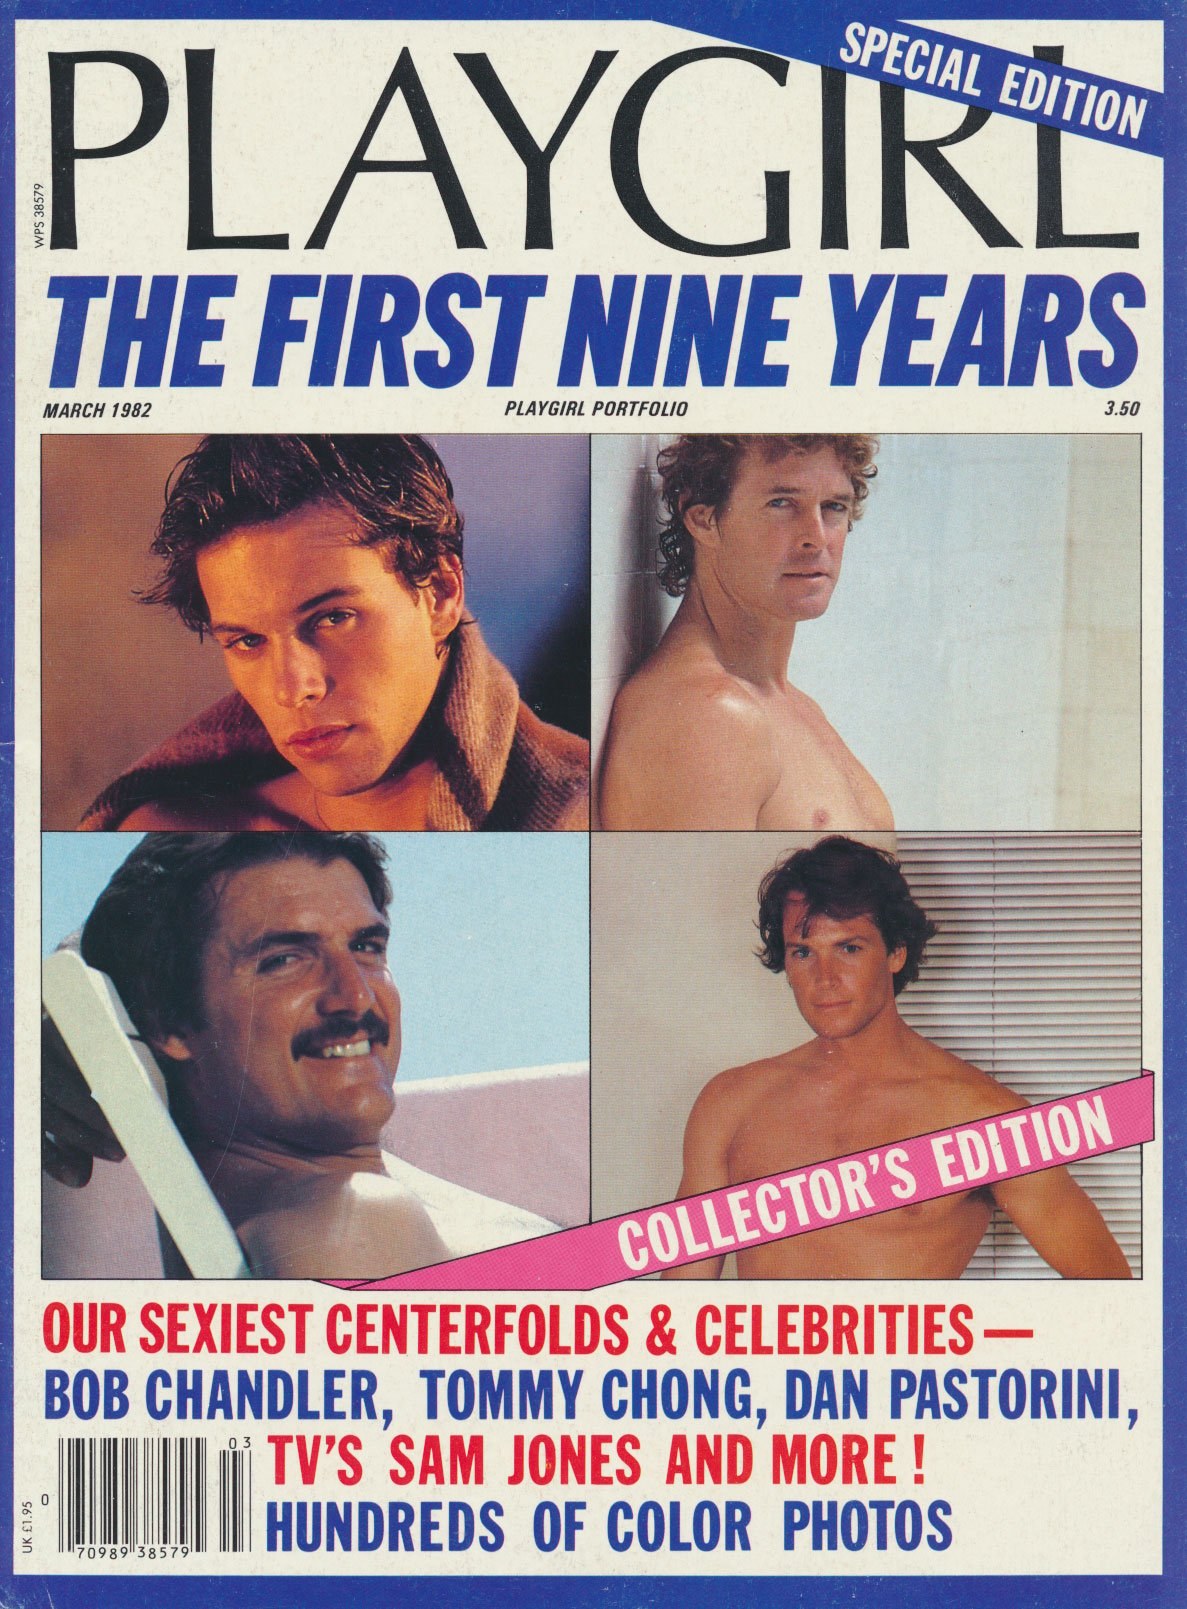 Playgirl Portfolio March 1982, The First Nine Years